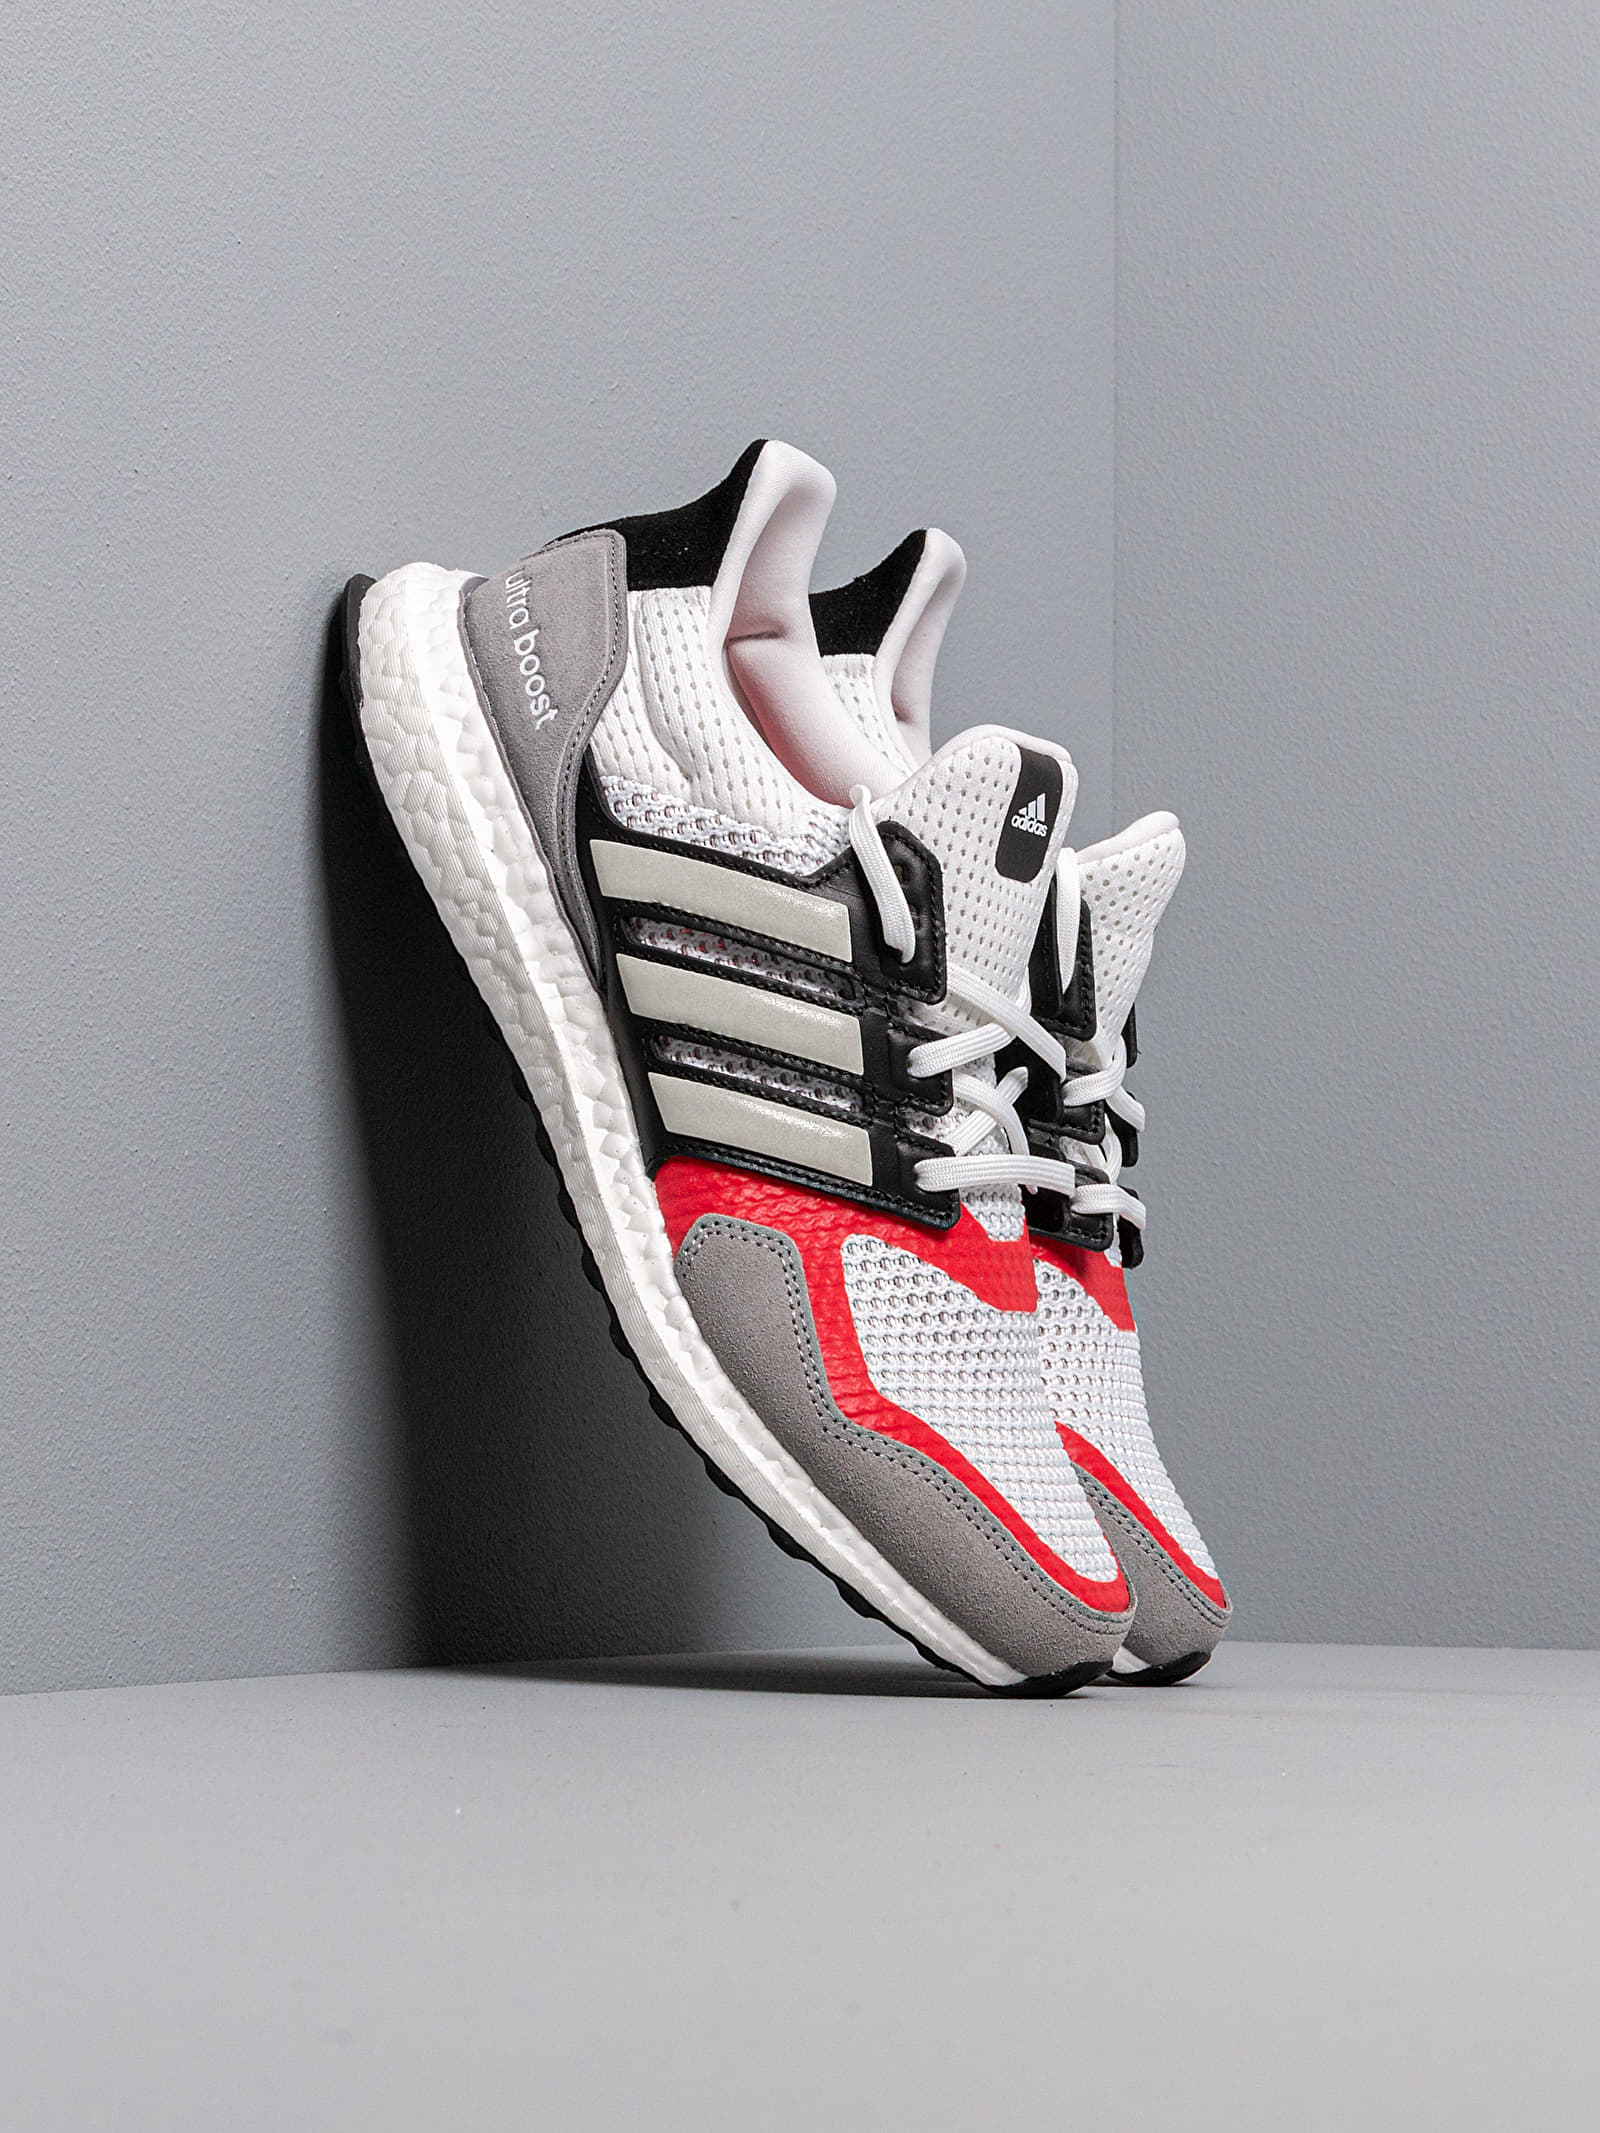 Men's shoes adidas UltraBOOST S&L M Ftw White/ Grey Two/ Scarlet